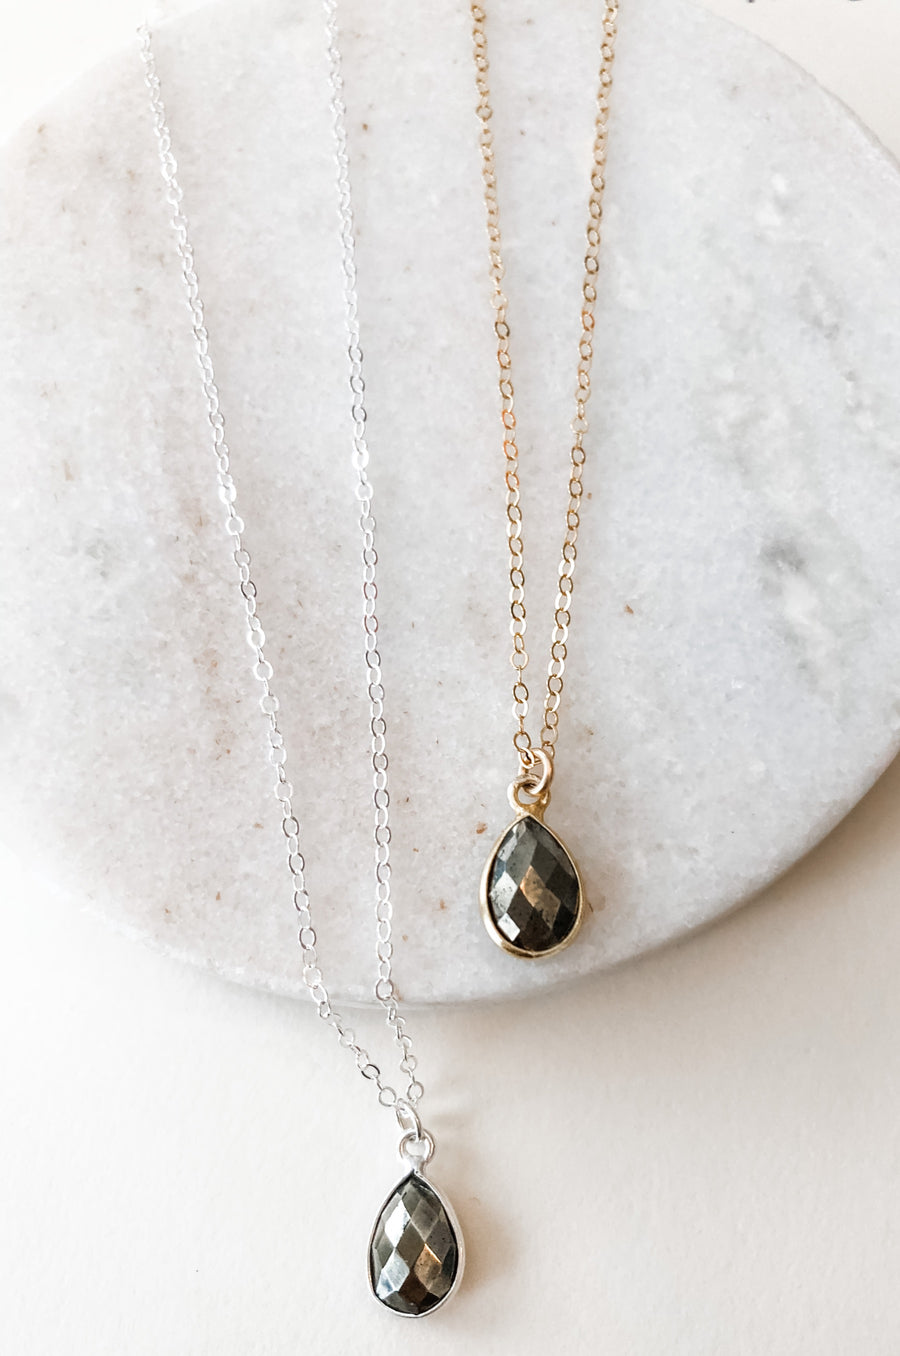 Pyrite gemstone bezeled necklace | sterling silver or gold